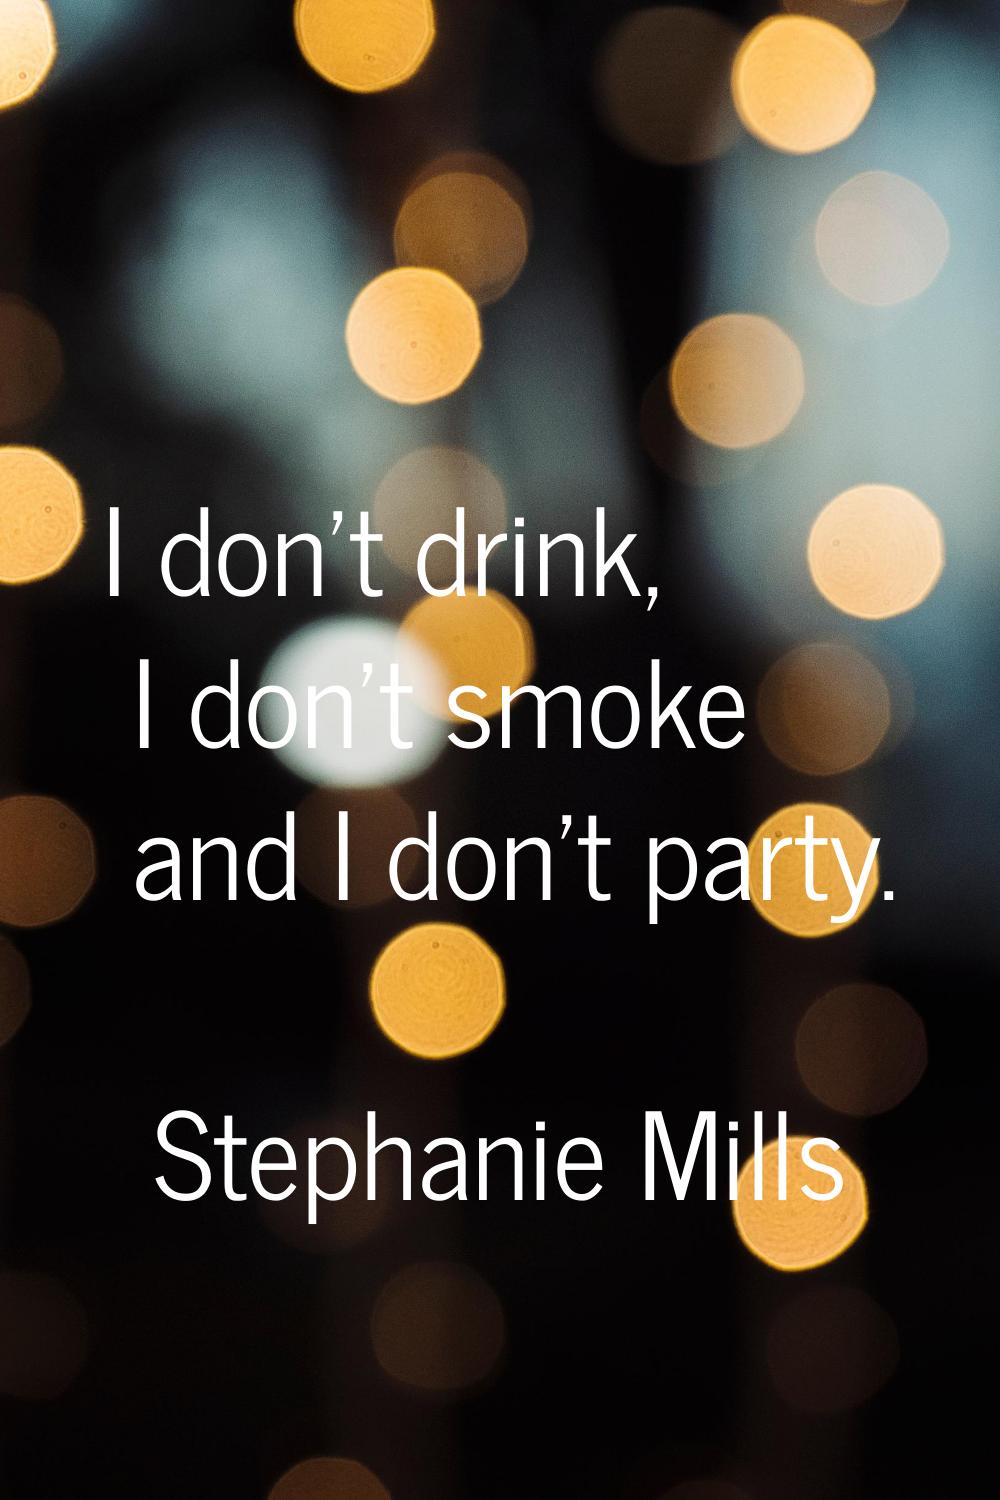 I don't drink, I don't smoke and I don't party.